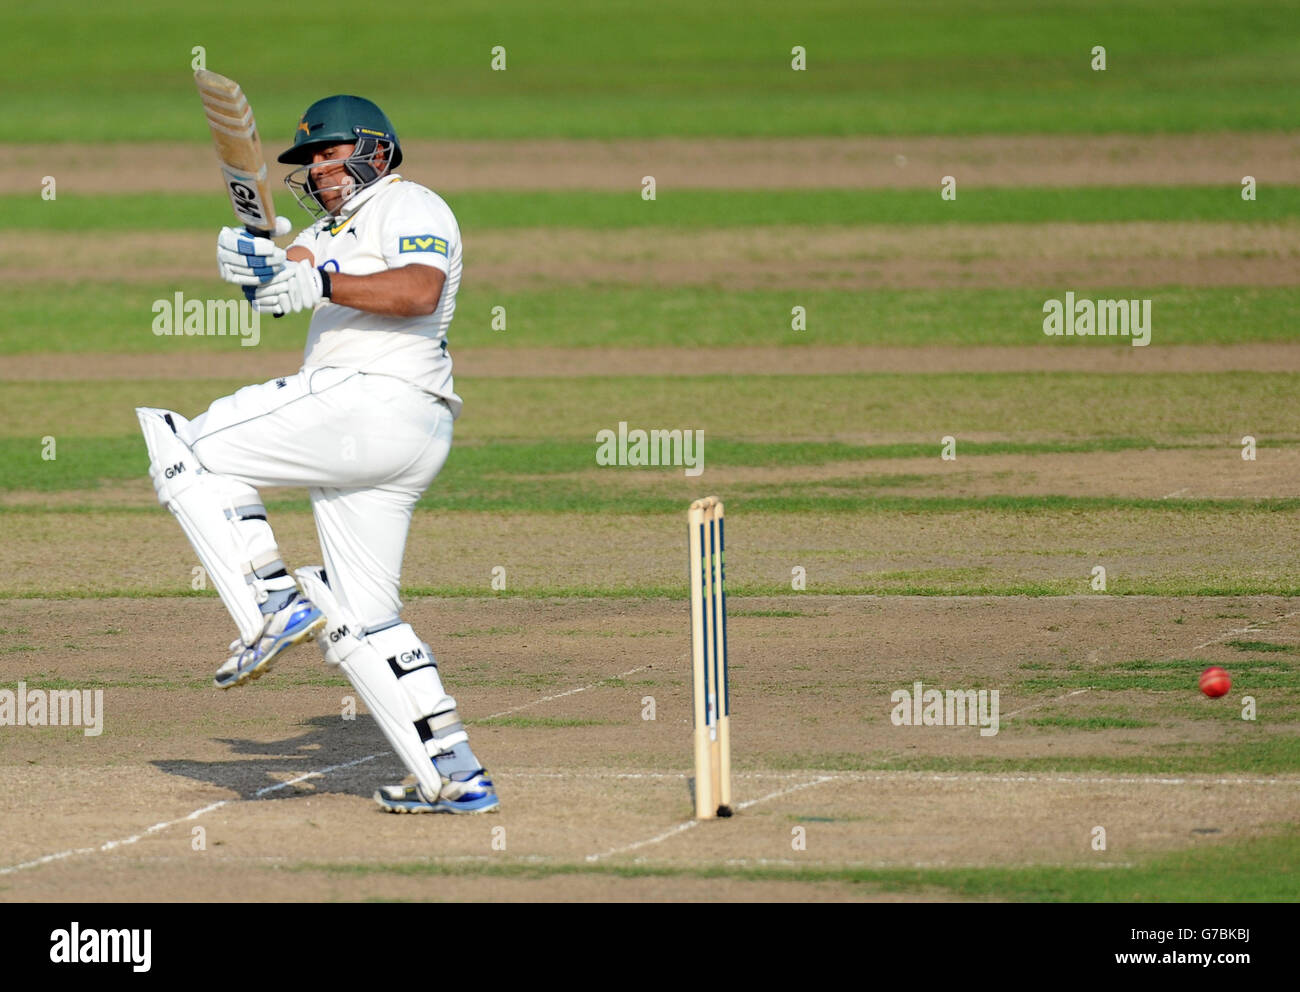 Nottinghamshire's Samit Patel bats during day three of the LV= County Championship Division One match at Trent Bridge, Nottingham. SSOCIATION Photo. Picture date: Thursday September 11, 2014. See PA story CRICKET Nottinghamshire. Photo credit should read: Simon Cooper/PA Wire Stock Photo